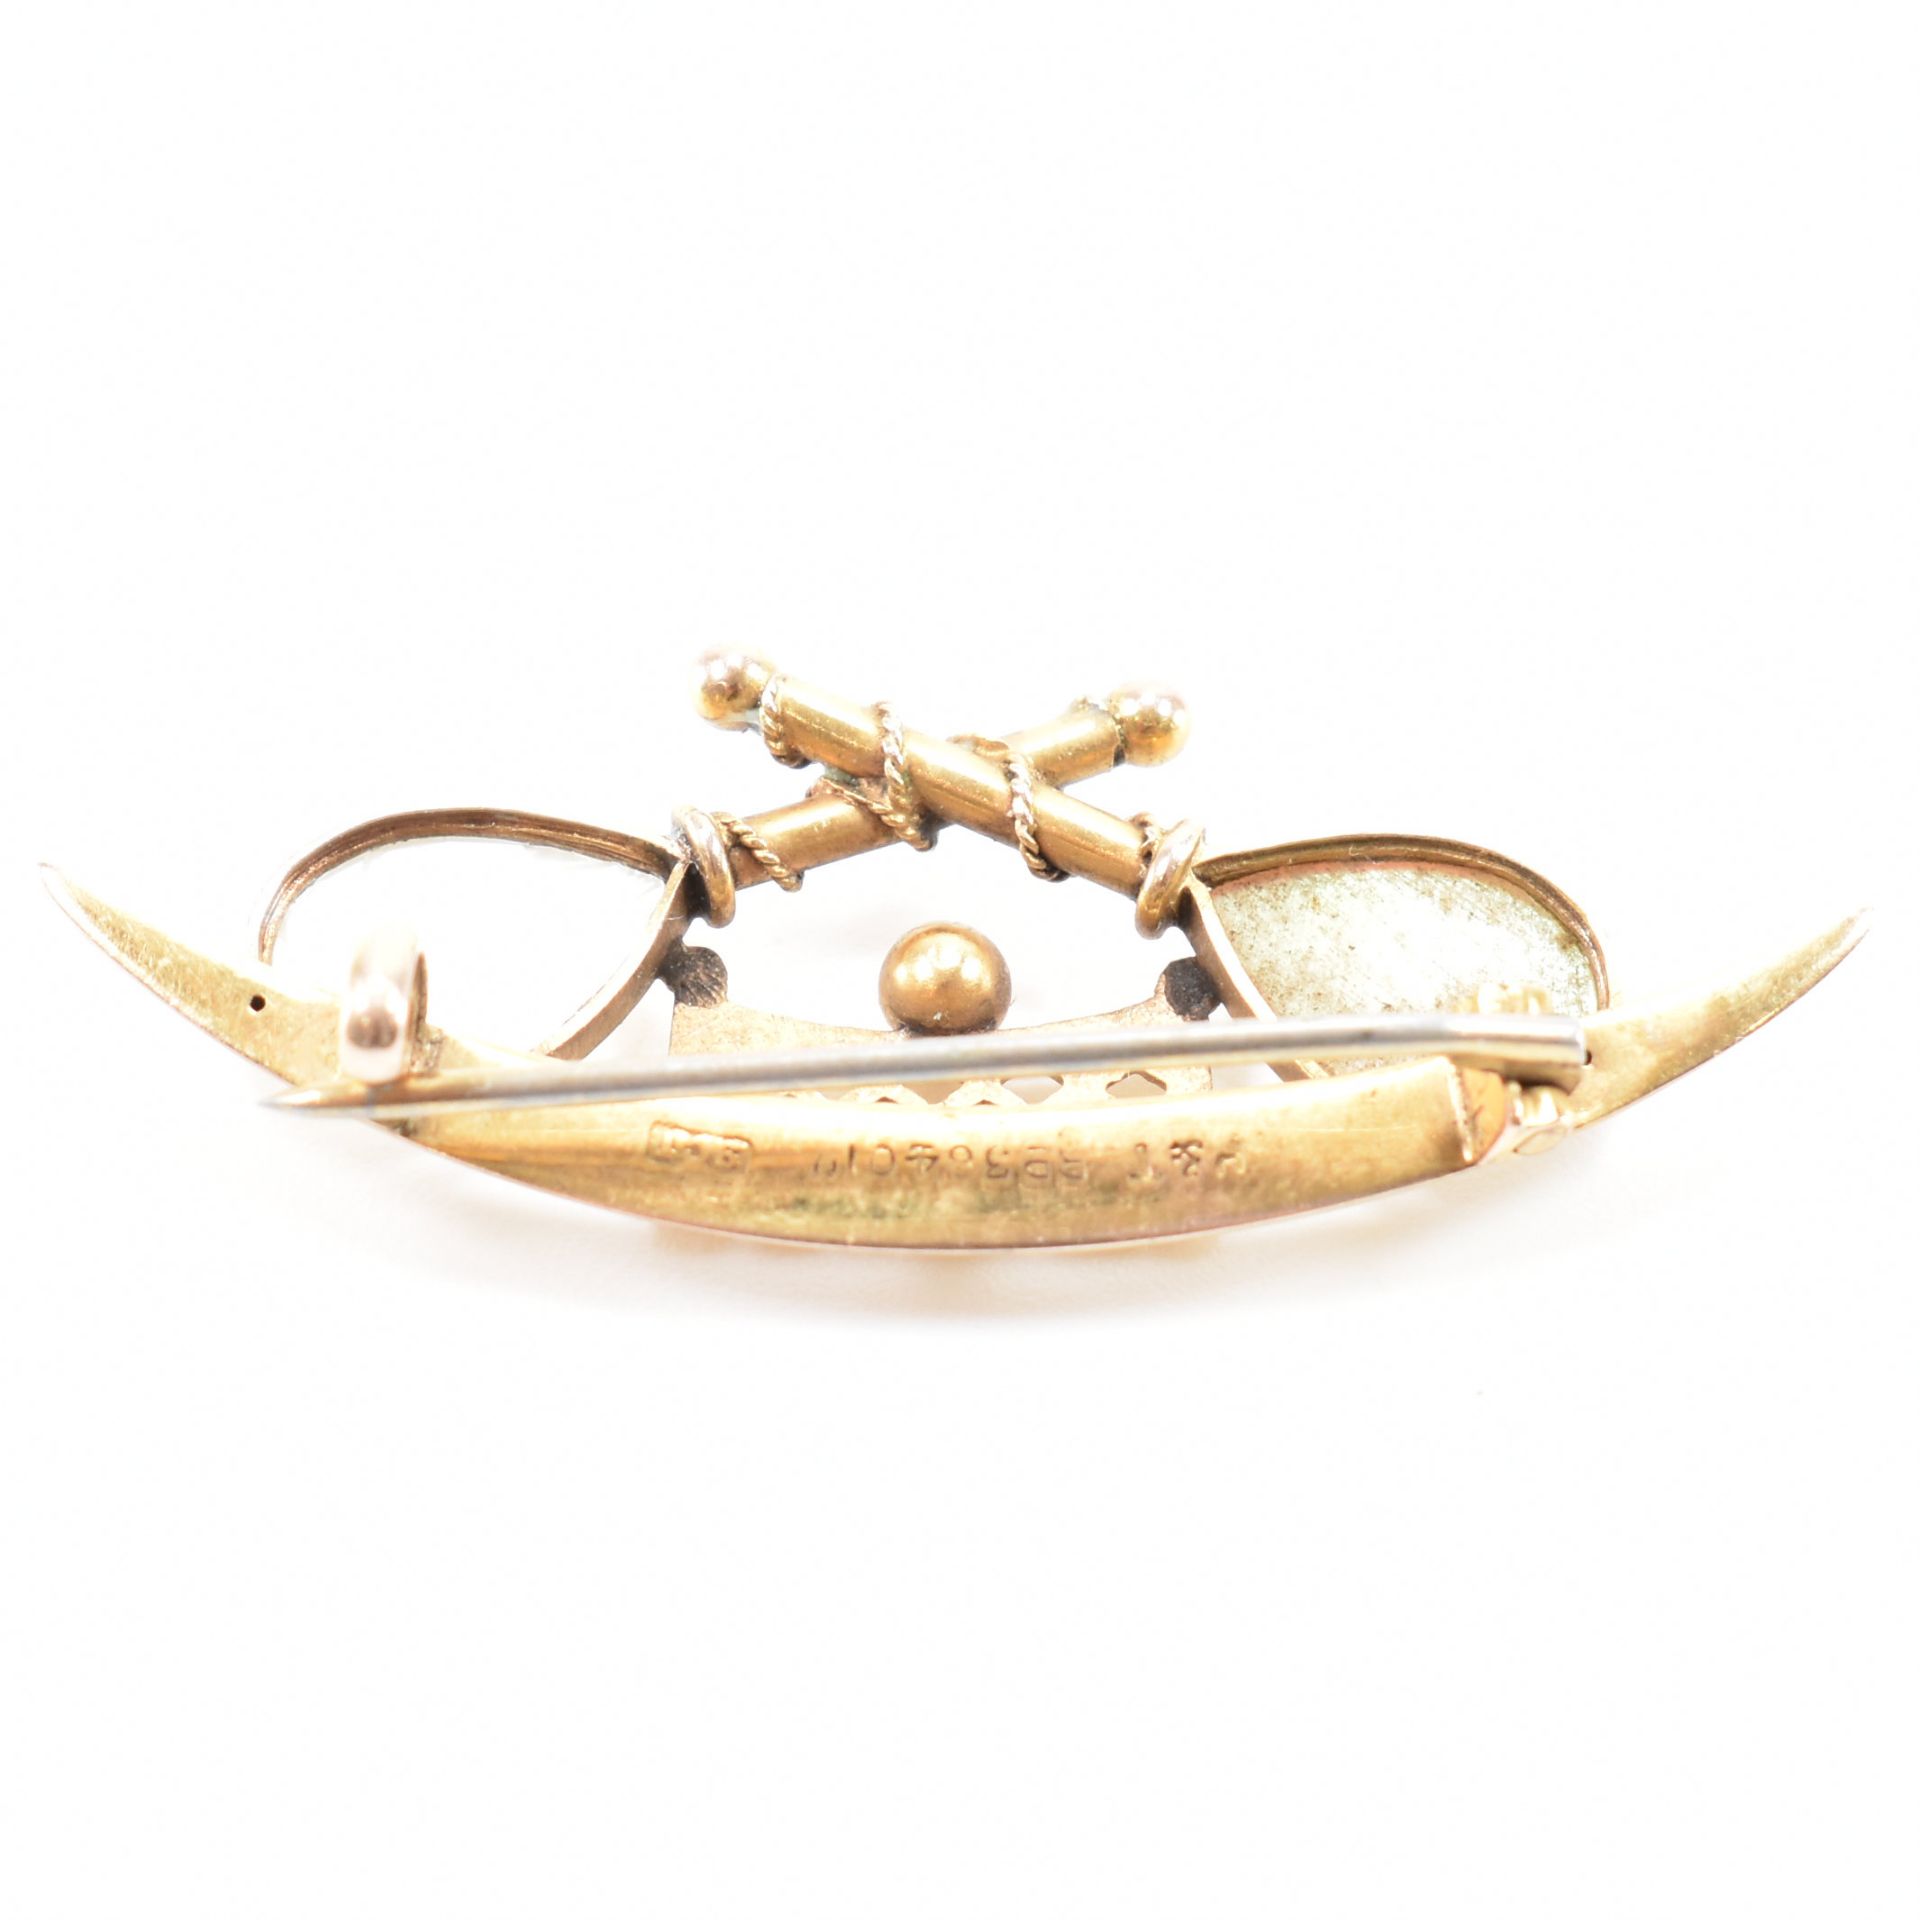 VICTORIAN 9CT GOLD & MOTHER OF PEARL TENNIS BROOCH - Image 2 of 6